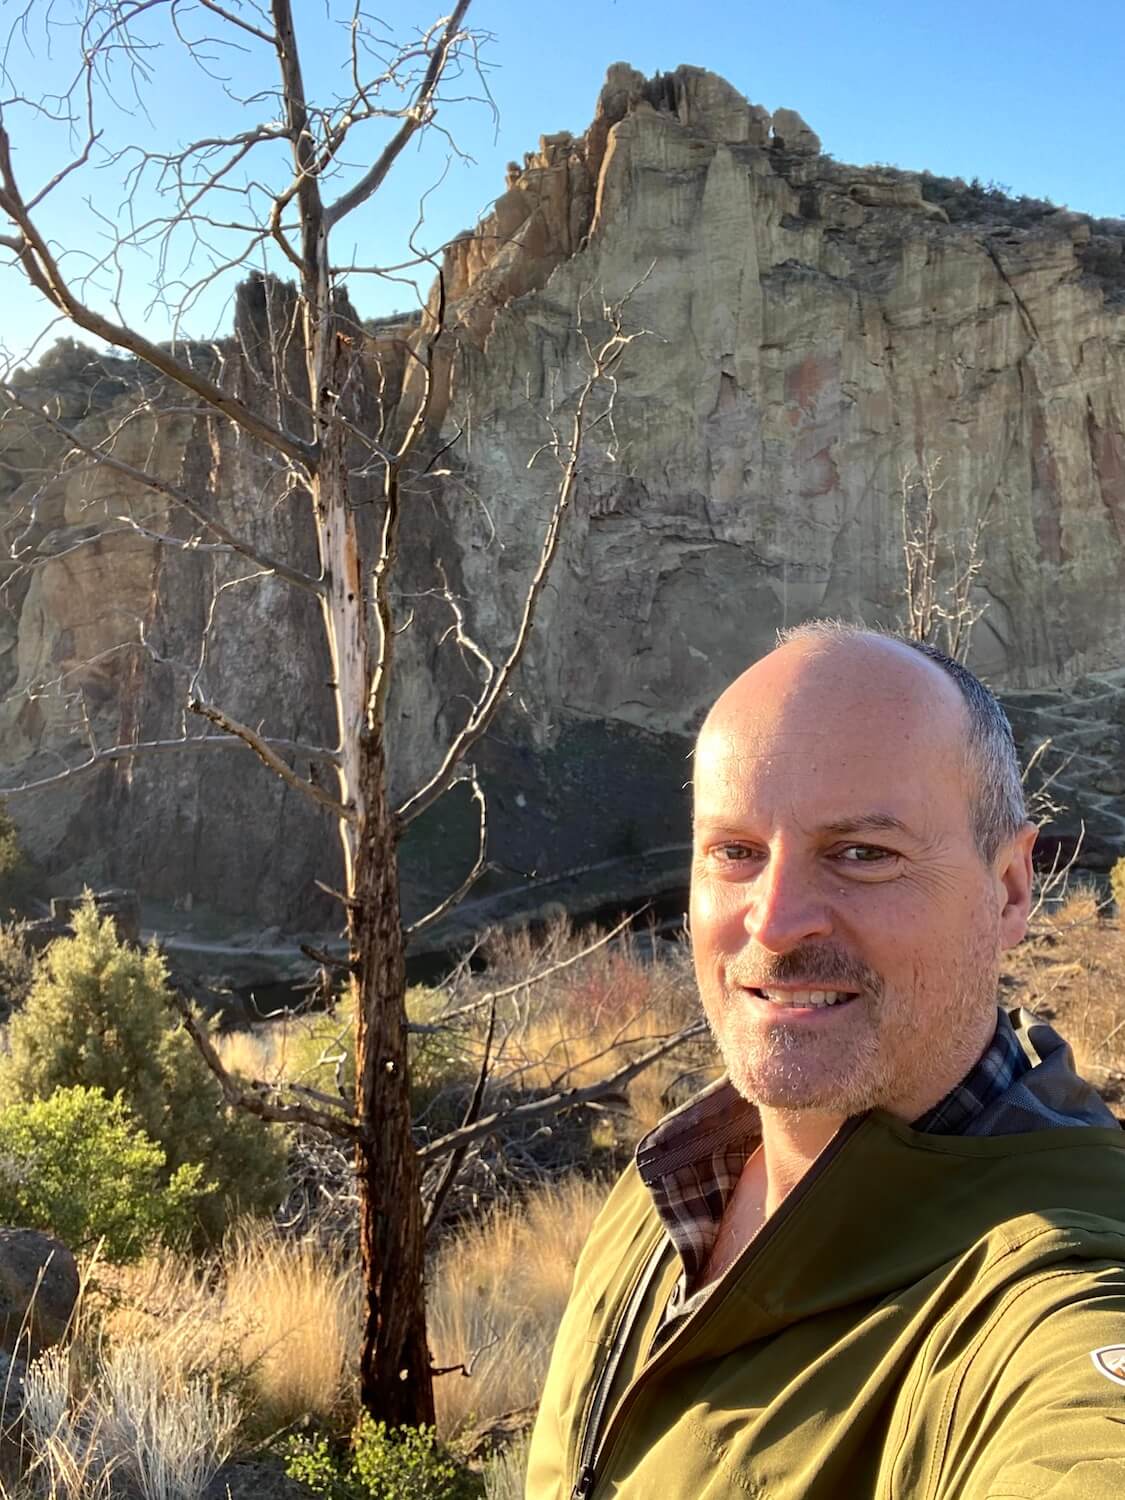 Matthew Kessi takes a selfie of himself standing in front of a rising rock face at Smith Rock State Park near Redmond, Oregon.  He's wearing a green coat and plaid shirt and stands in front of a dead juniper tree that stands amongst low brush and grass. 